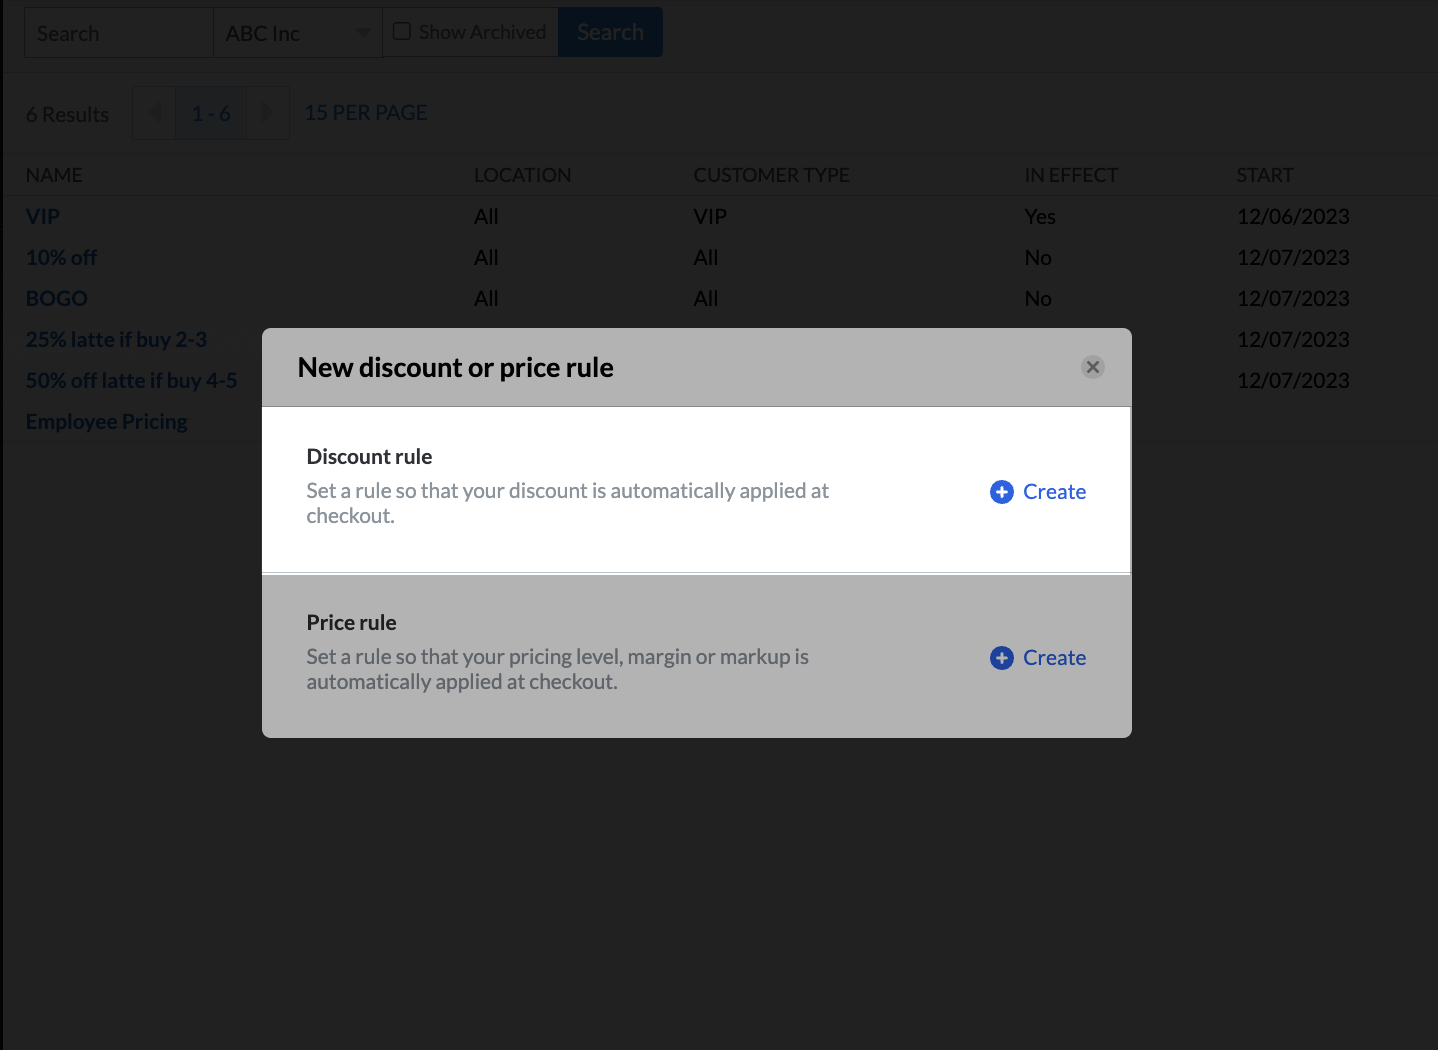 Modal with option to create a new Discount rule (emphasized) or Price rule.